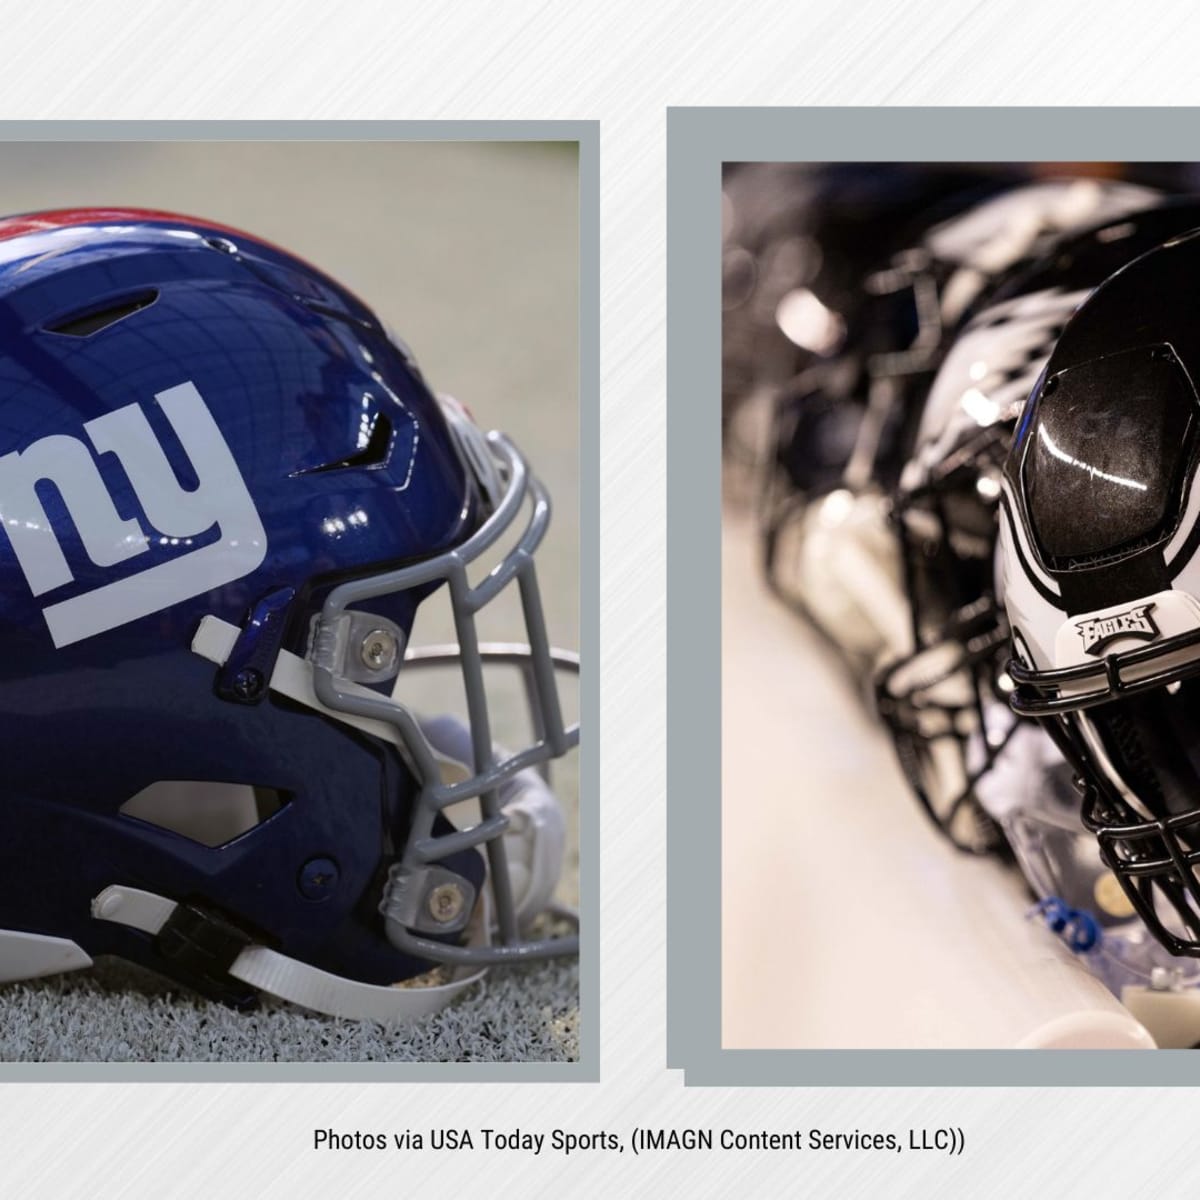 How much do tickets for the Giants vs Eagles NFL Divisional Round